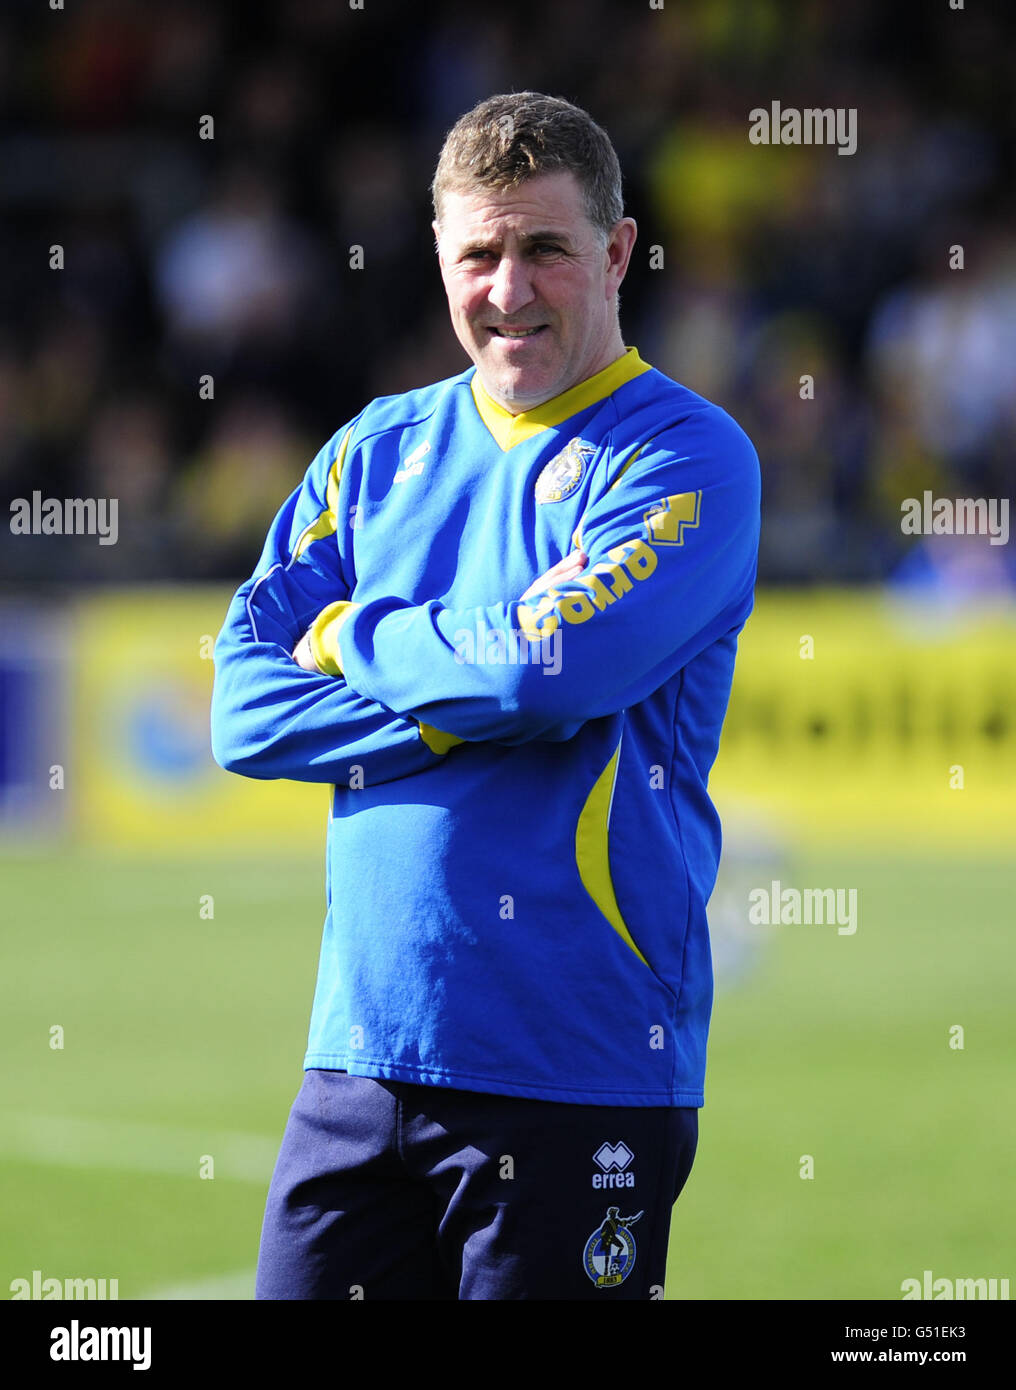 Soccer - npower Football League Two - Torquay United v Bristol Rovers - Plainmoor Ground. Bristol Rovers manager Mark McGhee during the npower Football League Two match at Plainmoor, Torquay. Stock Photo